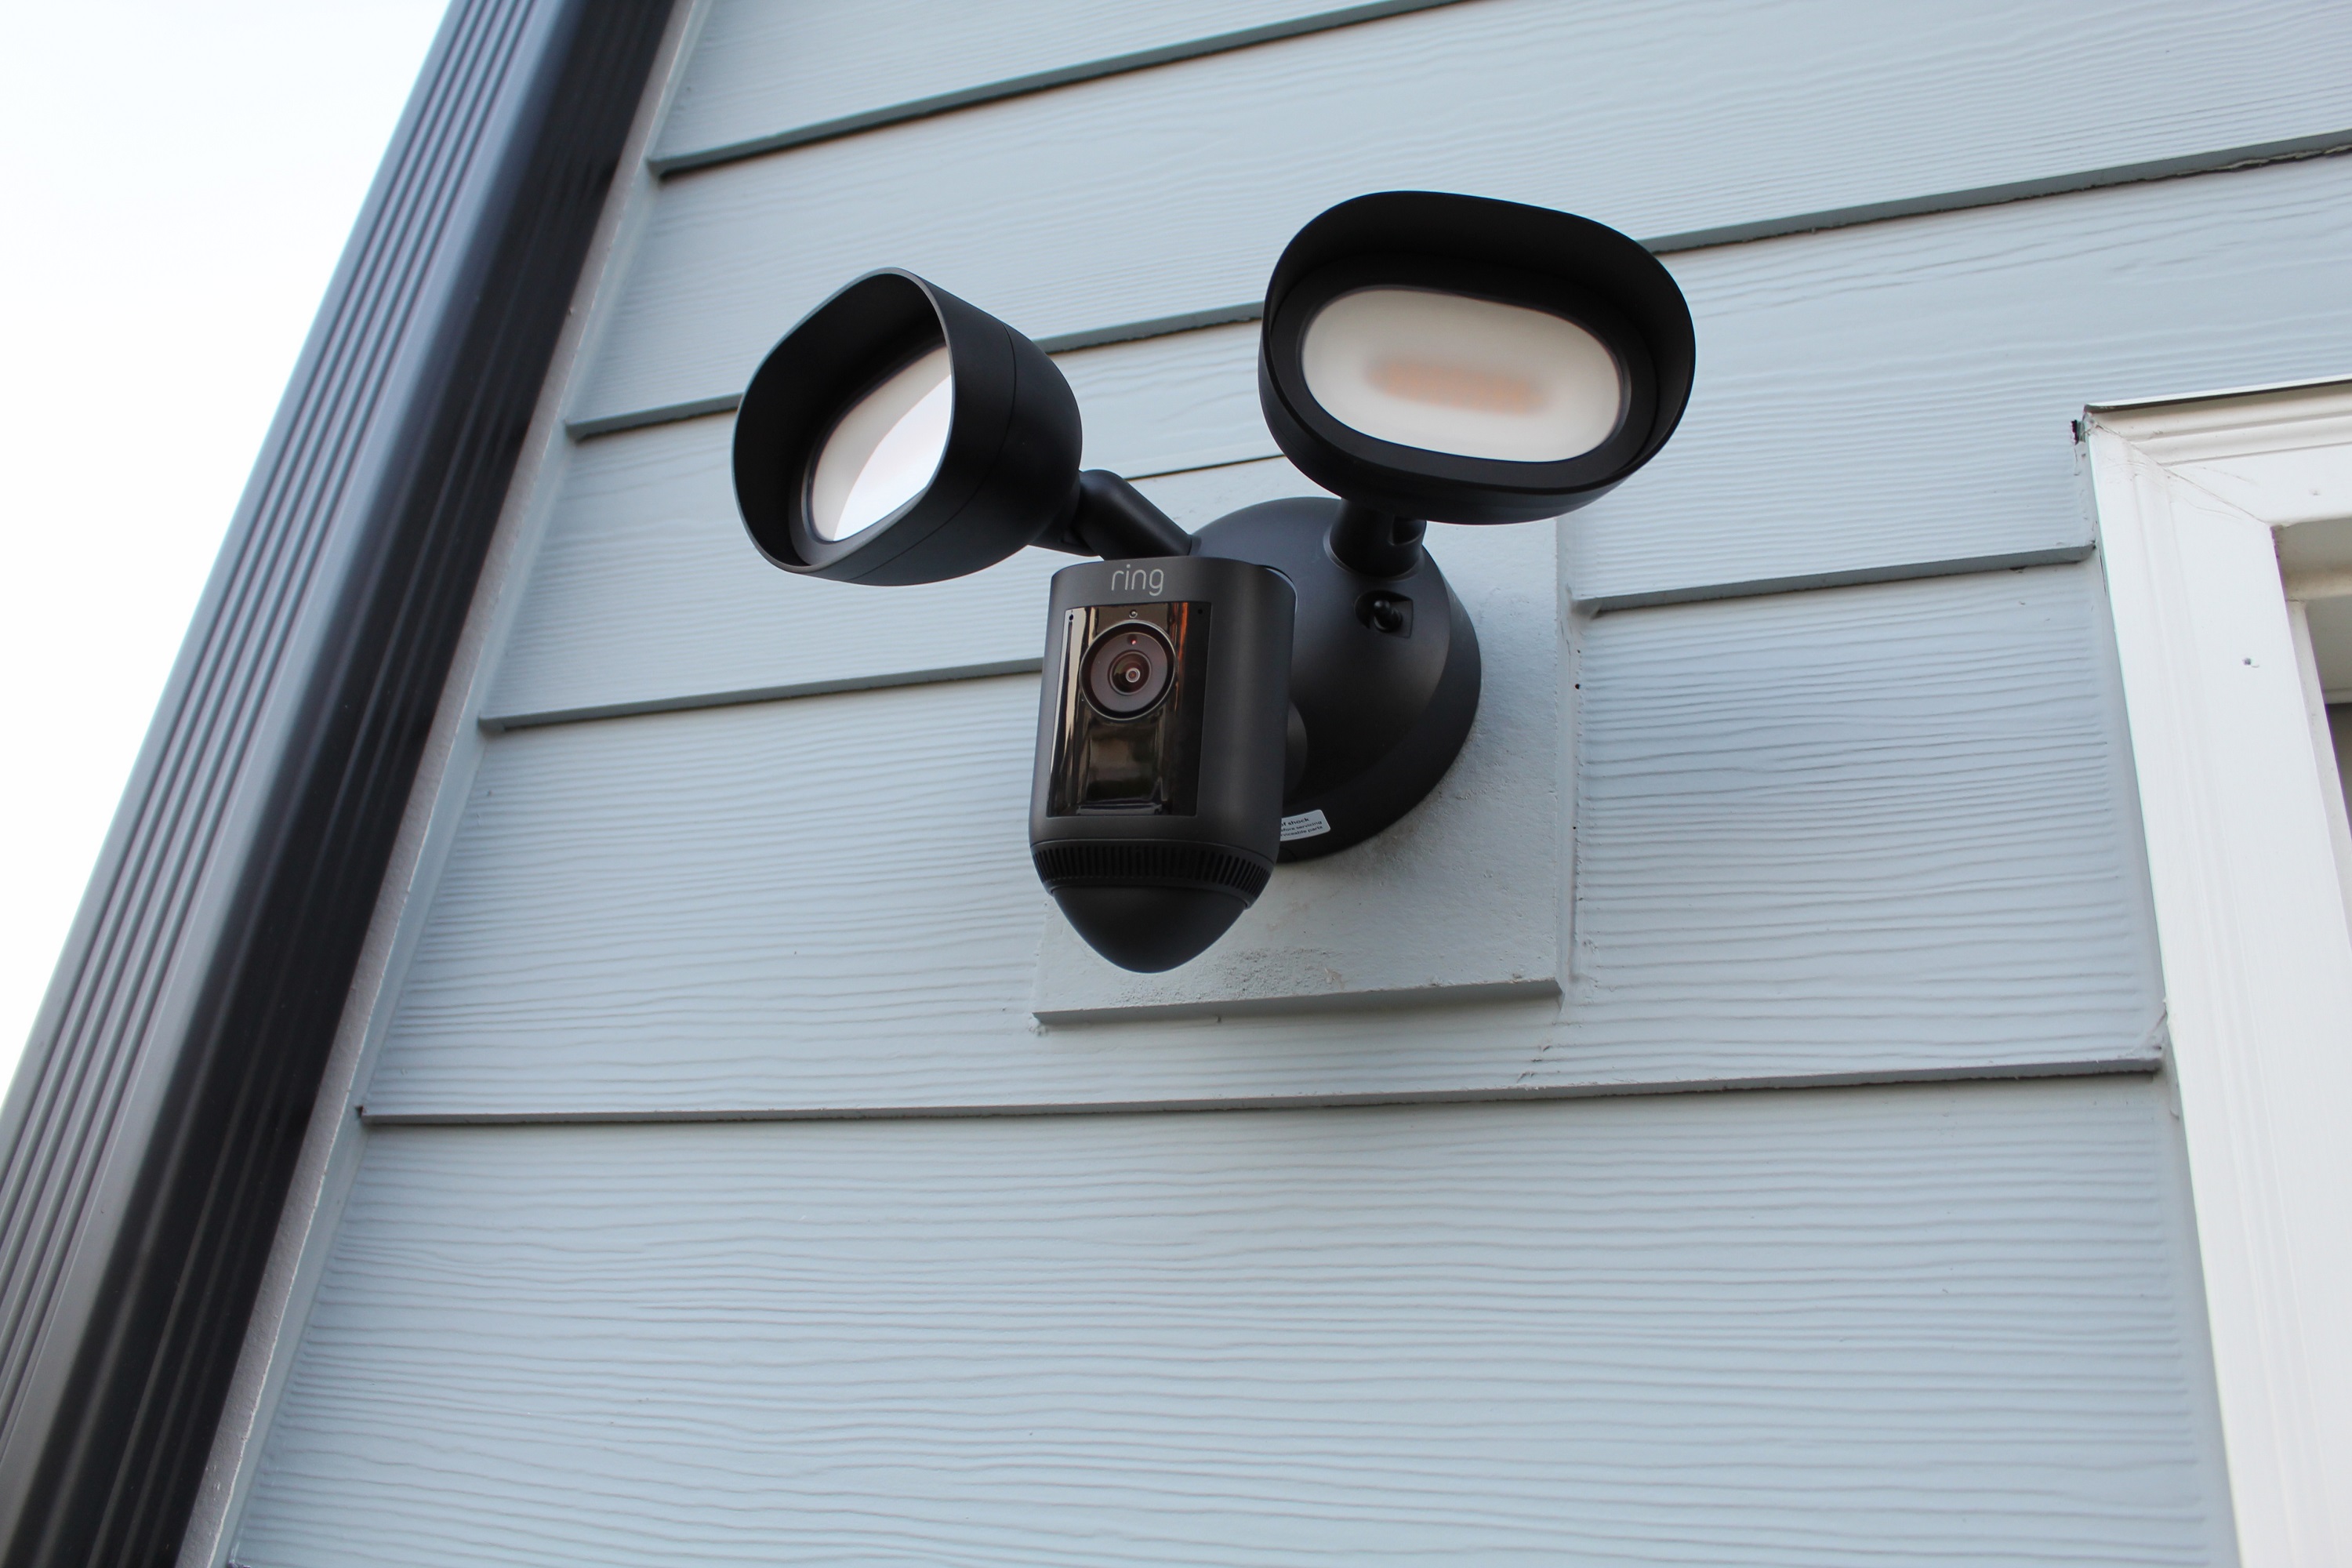 Ring Floodlight Cam Wired Pro Review: More Bird's-Eye View